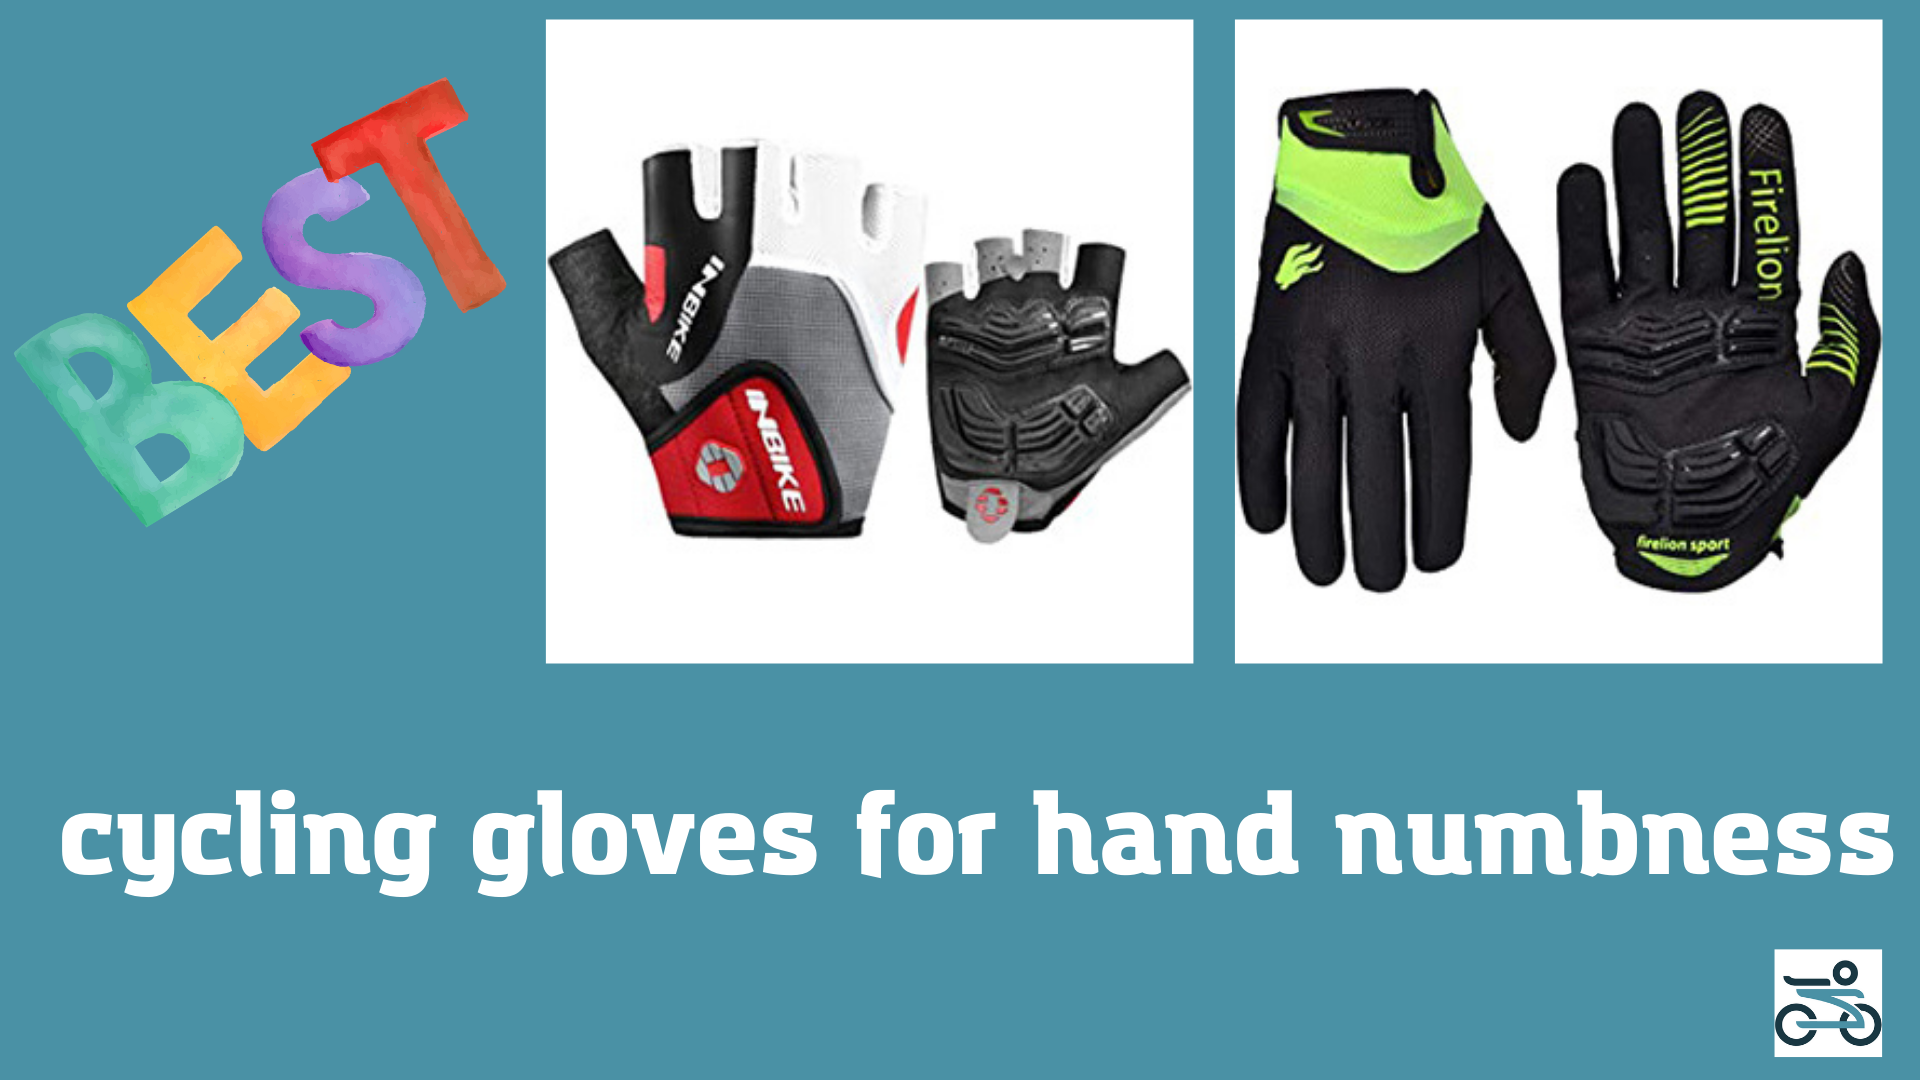 Best Cycling Gloves For Hand Numbness - 5 helpful gloves